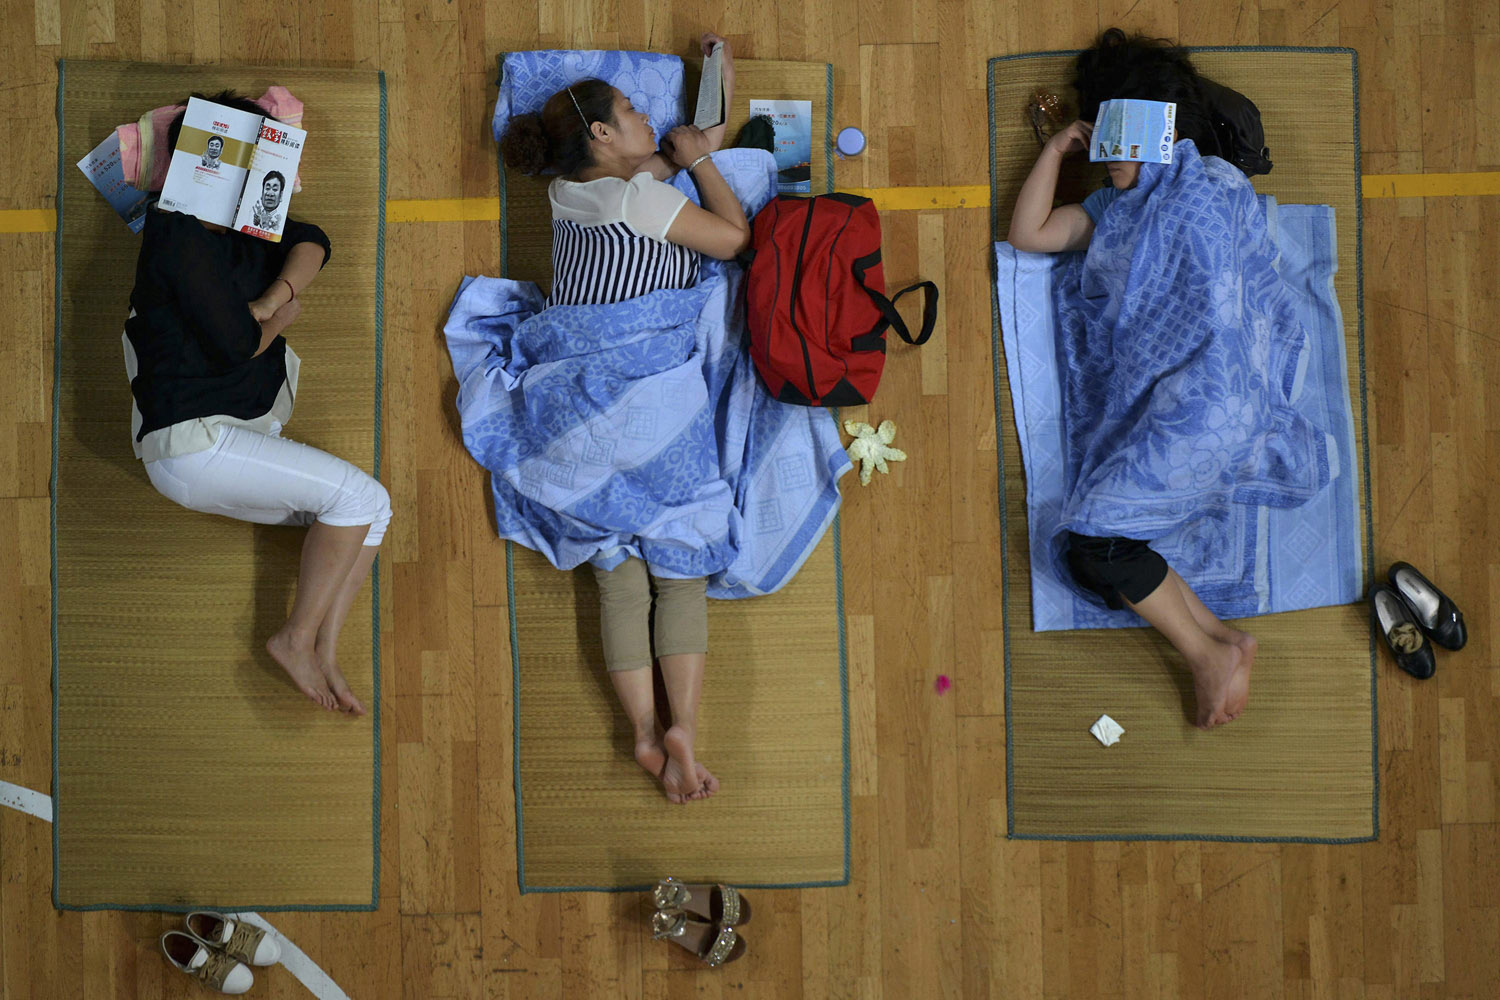 Parents of freshmen students sleep on mats laid out on the floor of a gymnasium at Huazhong Normal University in Wuhan